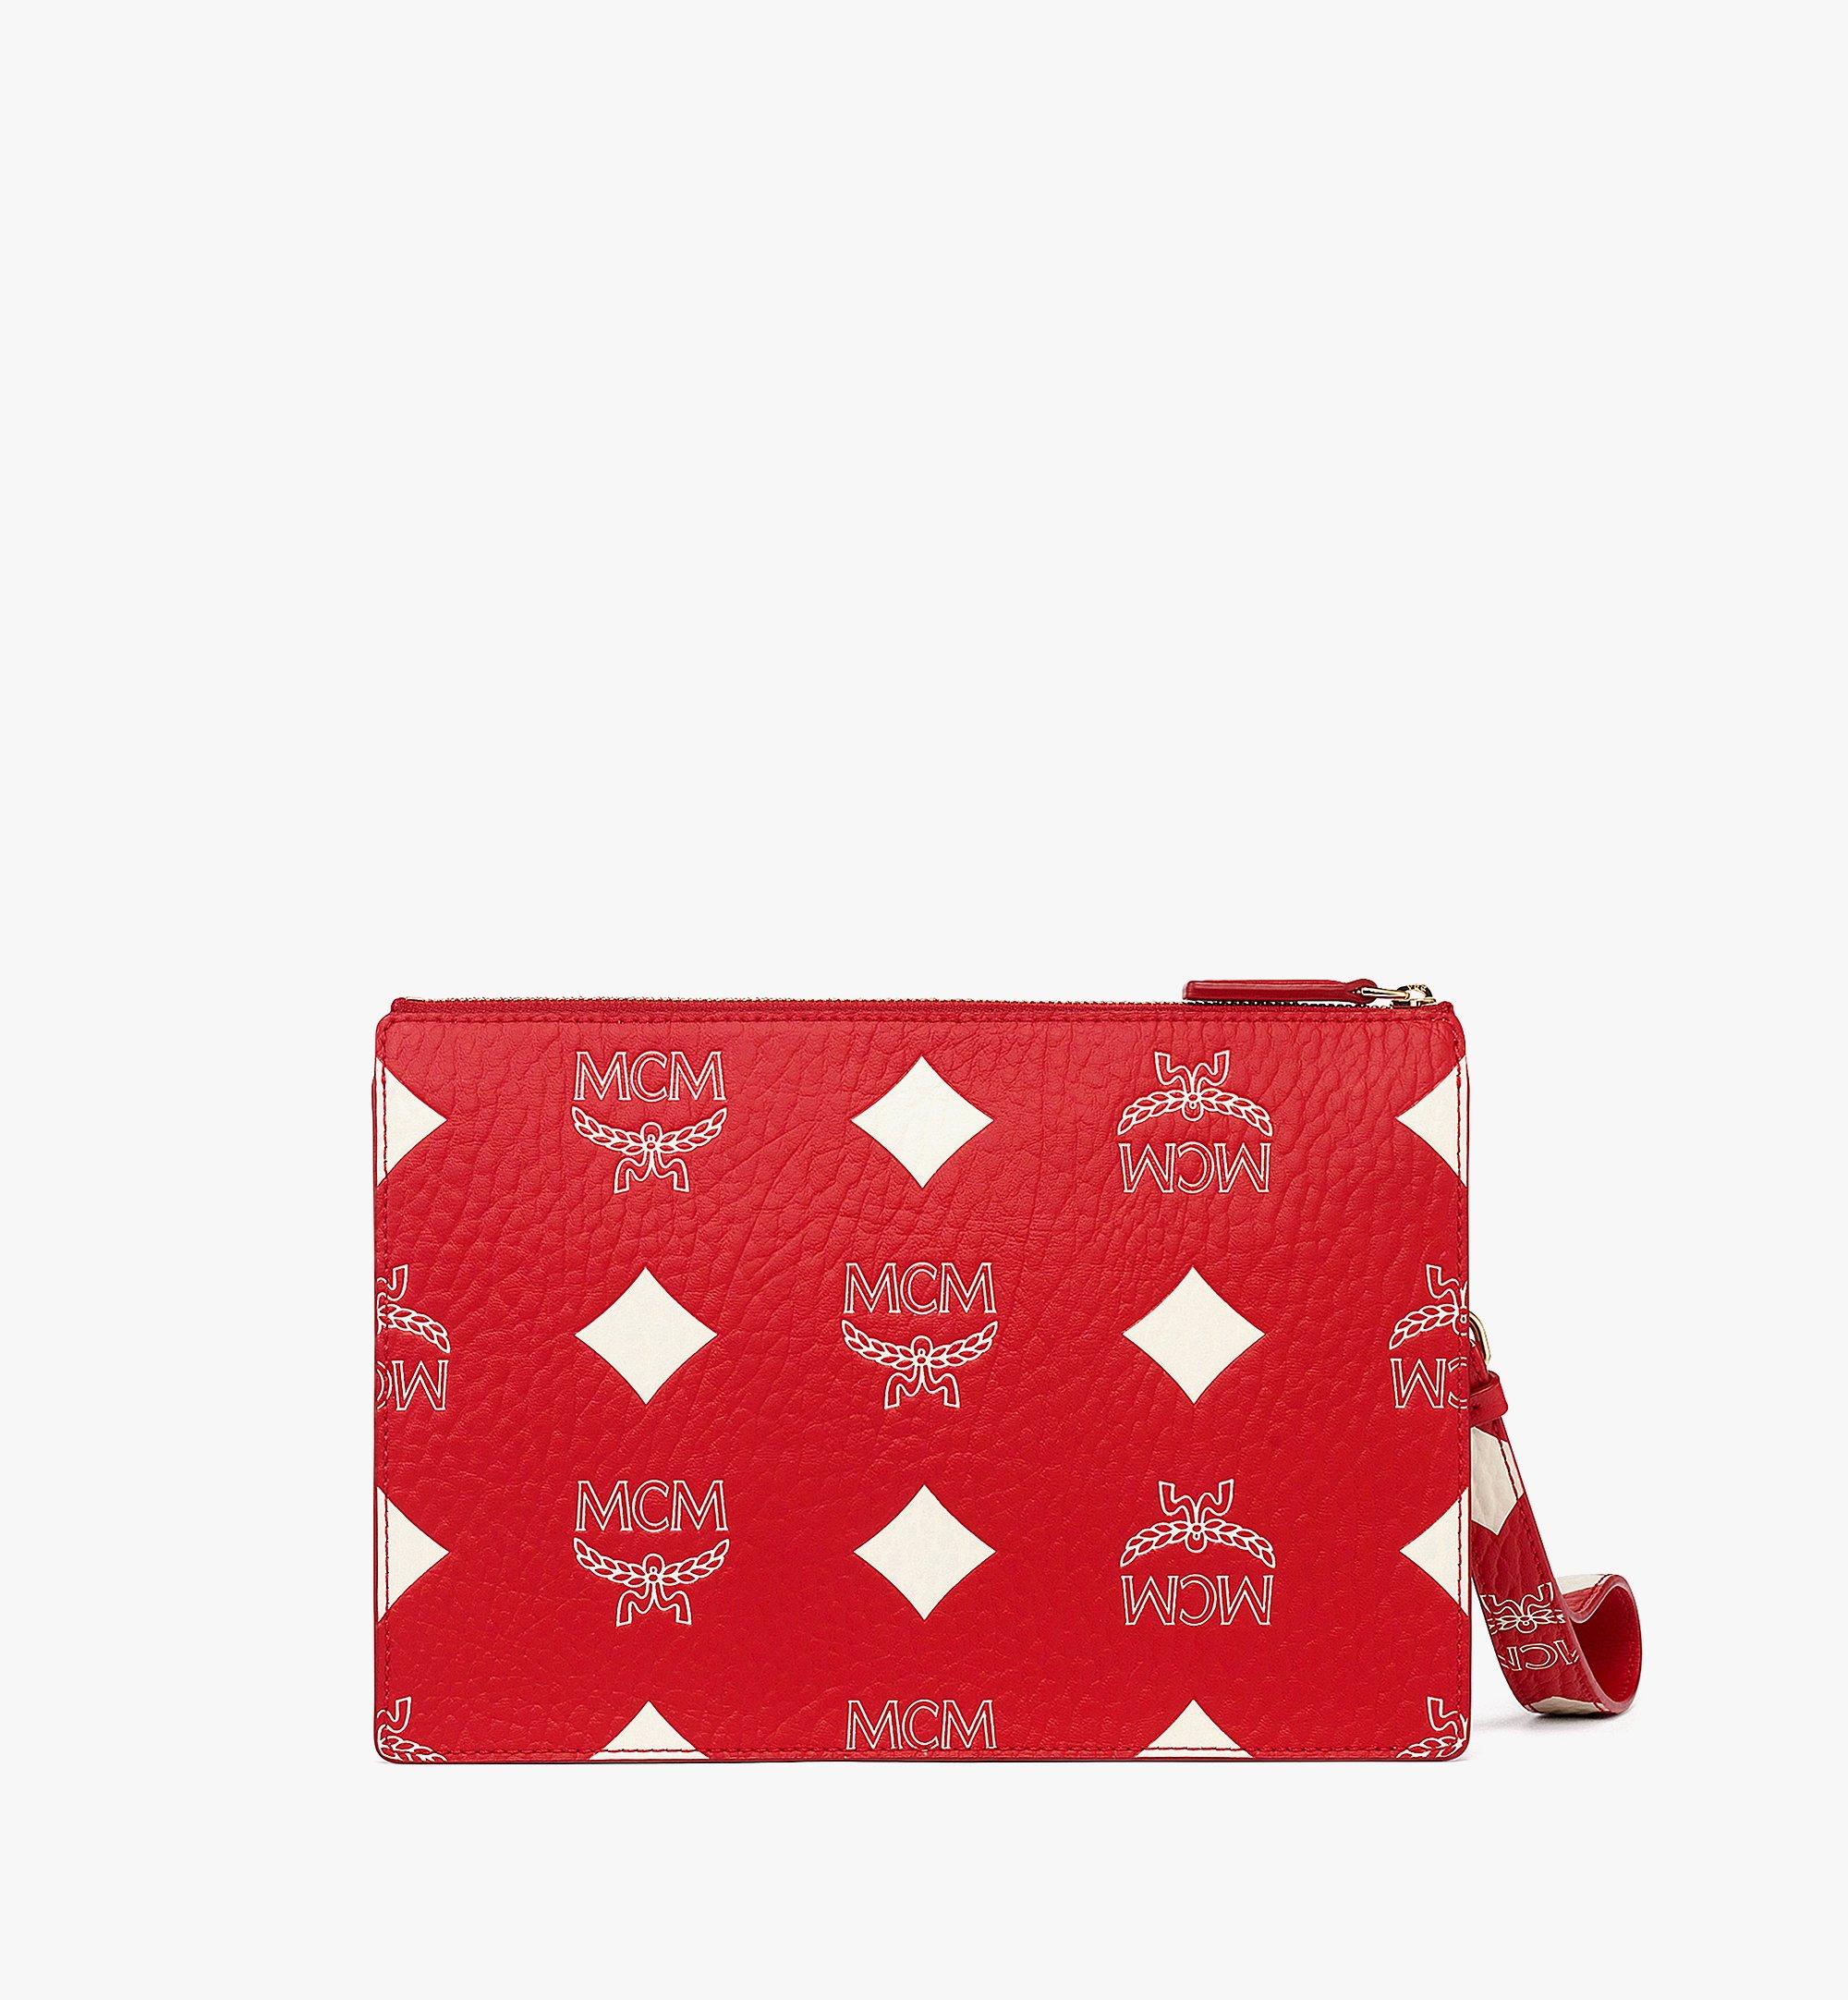 Small Wristlet Zip Pouch w/ Chain Strap in Maxi Visetos Red | MCM ®US